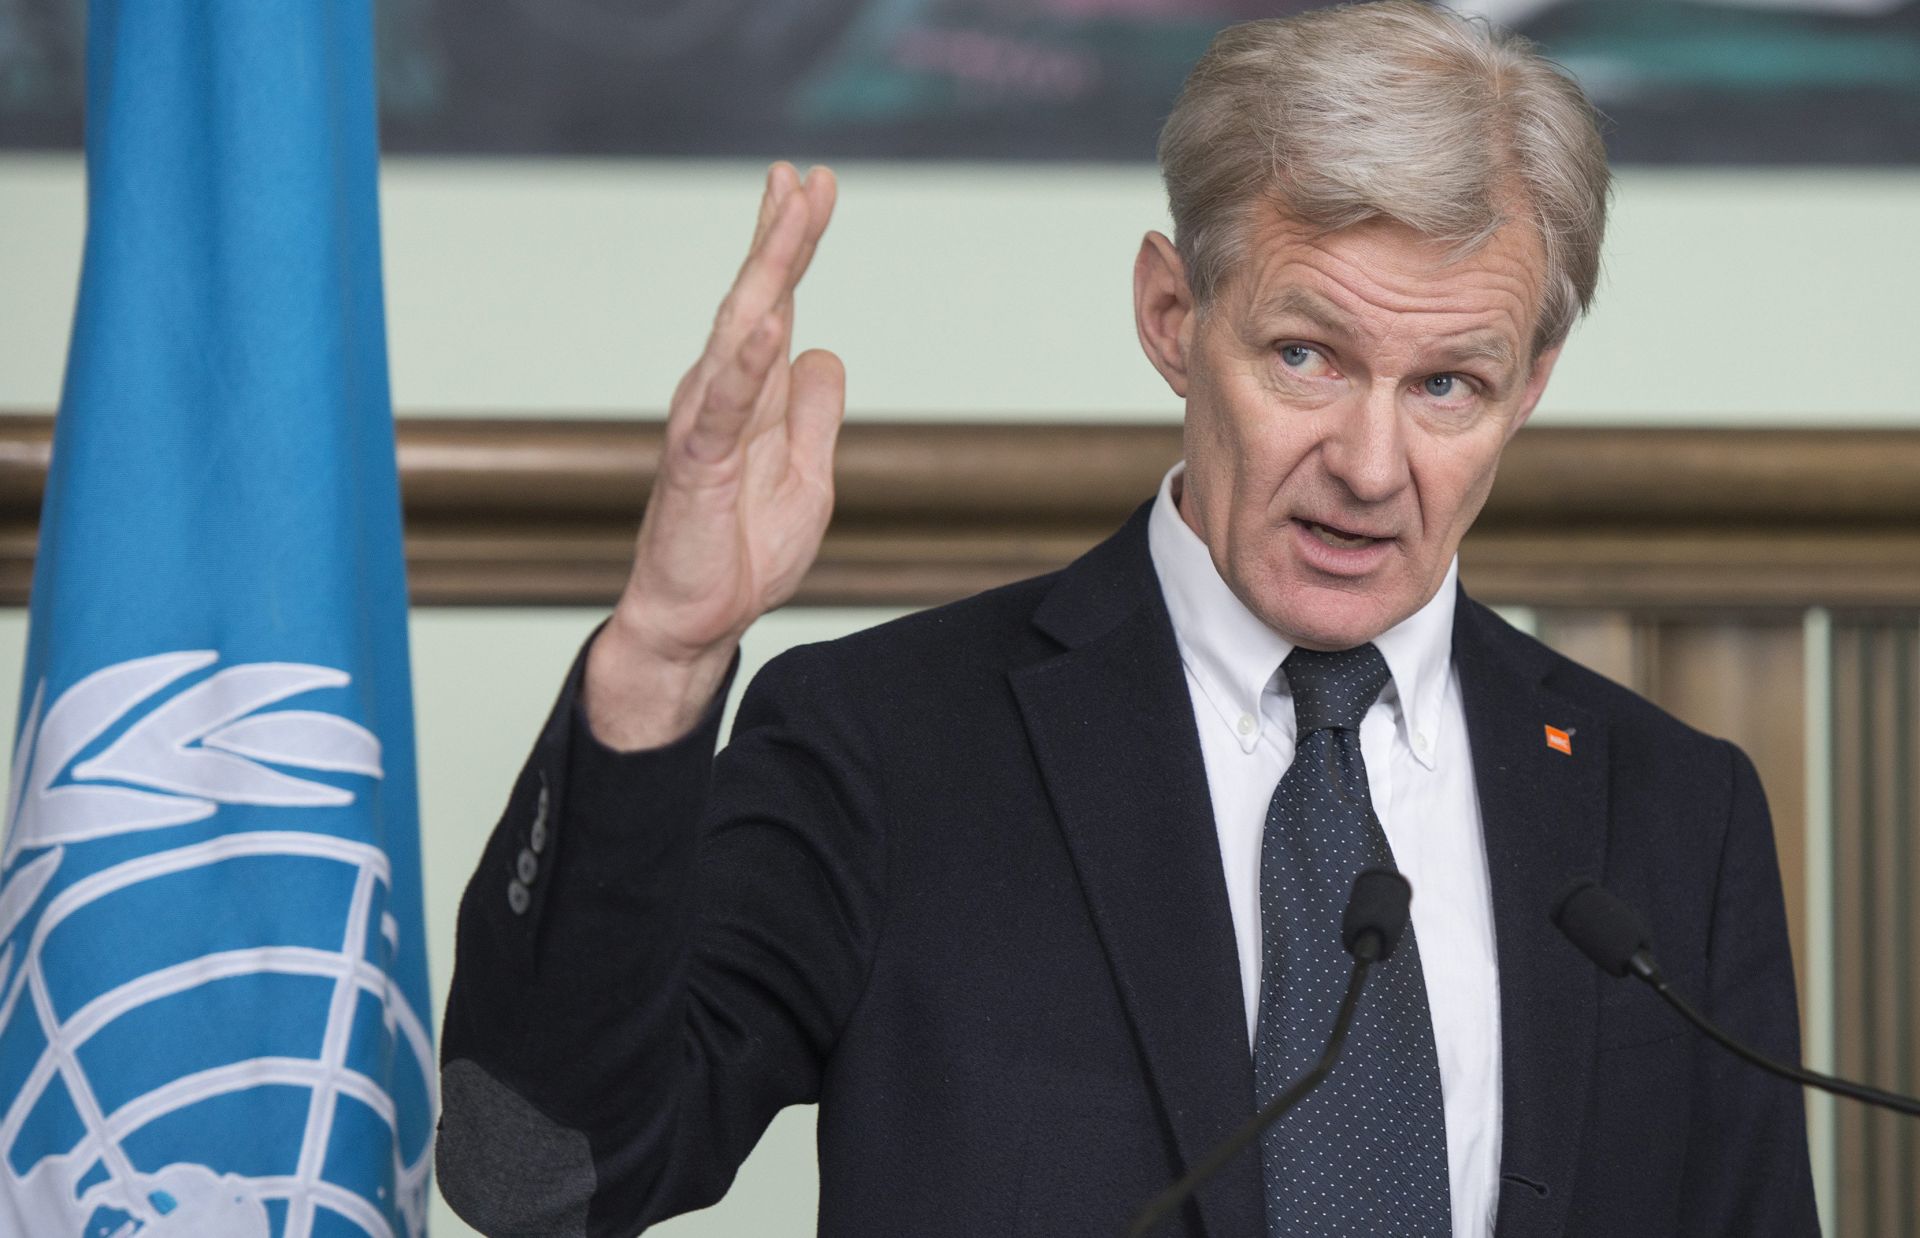 epa05180084 Jan Egeland, Senior Advisor to the United Nations Special Envoy for Syria, speaks after the update on Task Force for Humanitarian Access in Syria, at the European headquarters of the United Nations, in Geneva, Switzerland, on Thursday, 25 February 2016.  EPA/MARTIAL TREZZINI